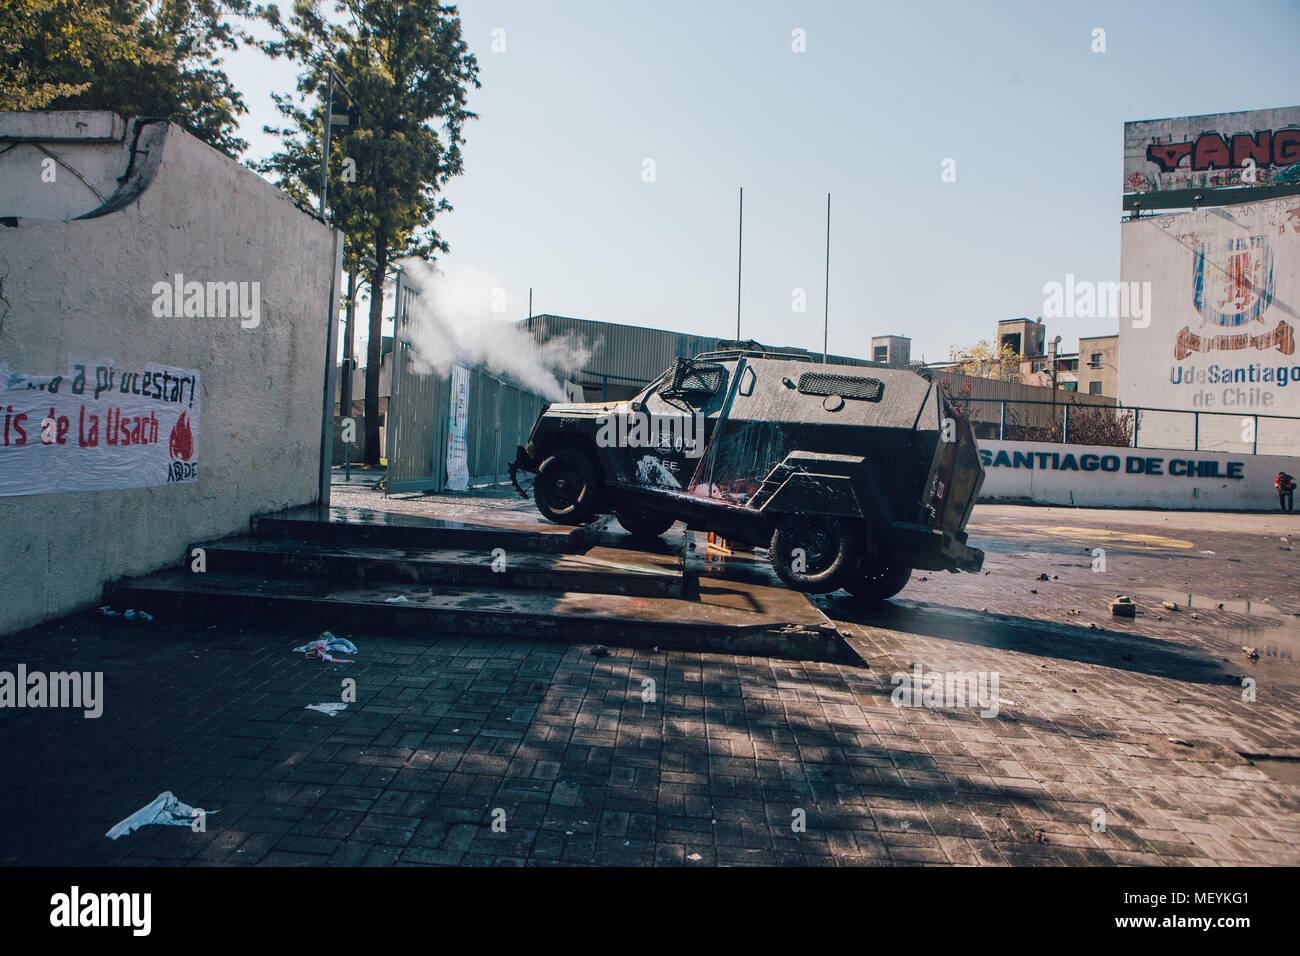 Santiago, Chile - April 19, 2018: Riot Police armored vehicle blocks entrance of the University of Santiago during a demonstration demanding an end to Stock Photo